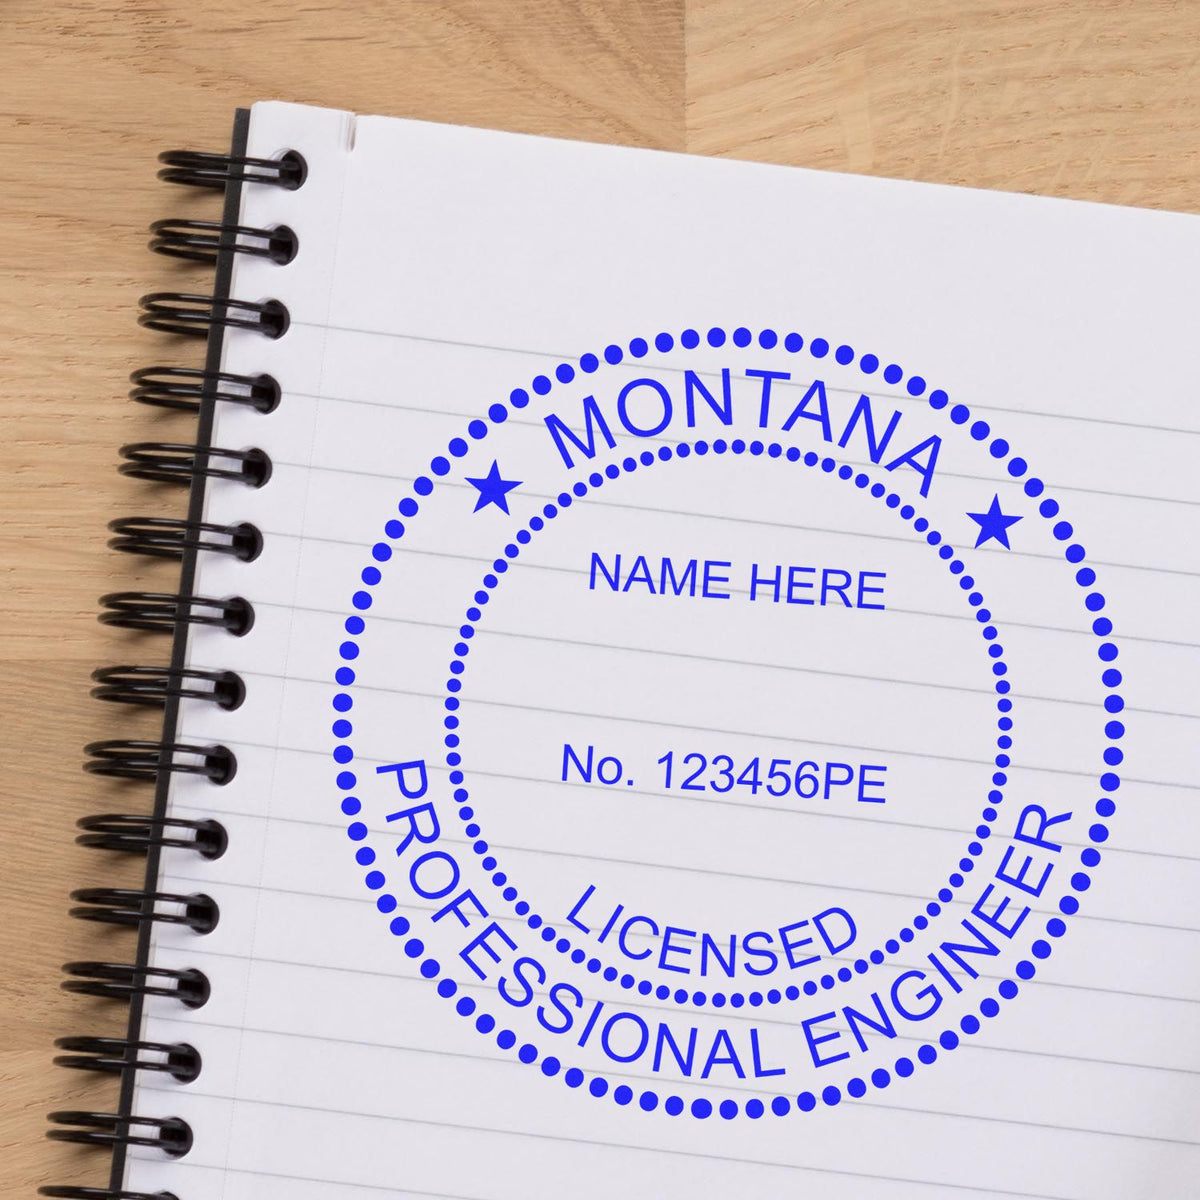 An alternative view of the Montana Professional Engineer Seal Stamp stamped on a sheet of paper showing the image in use